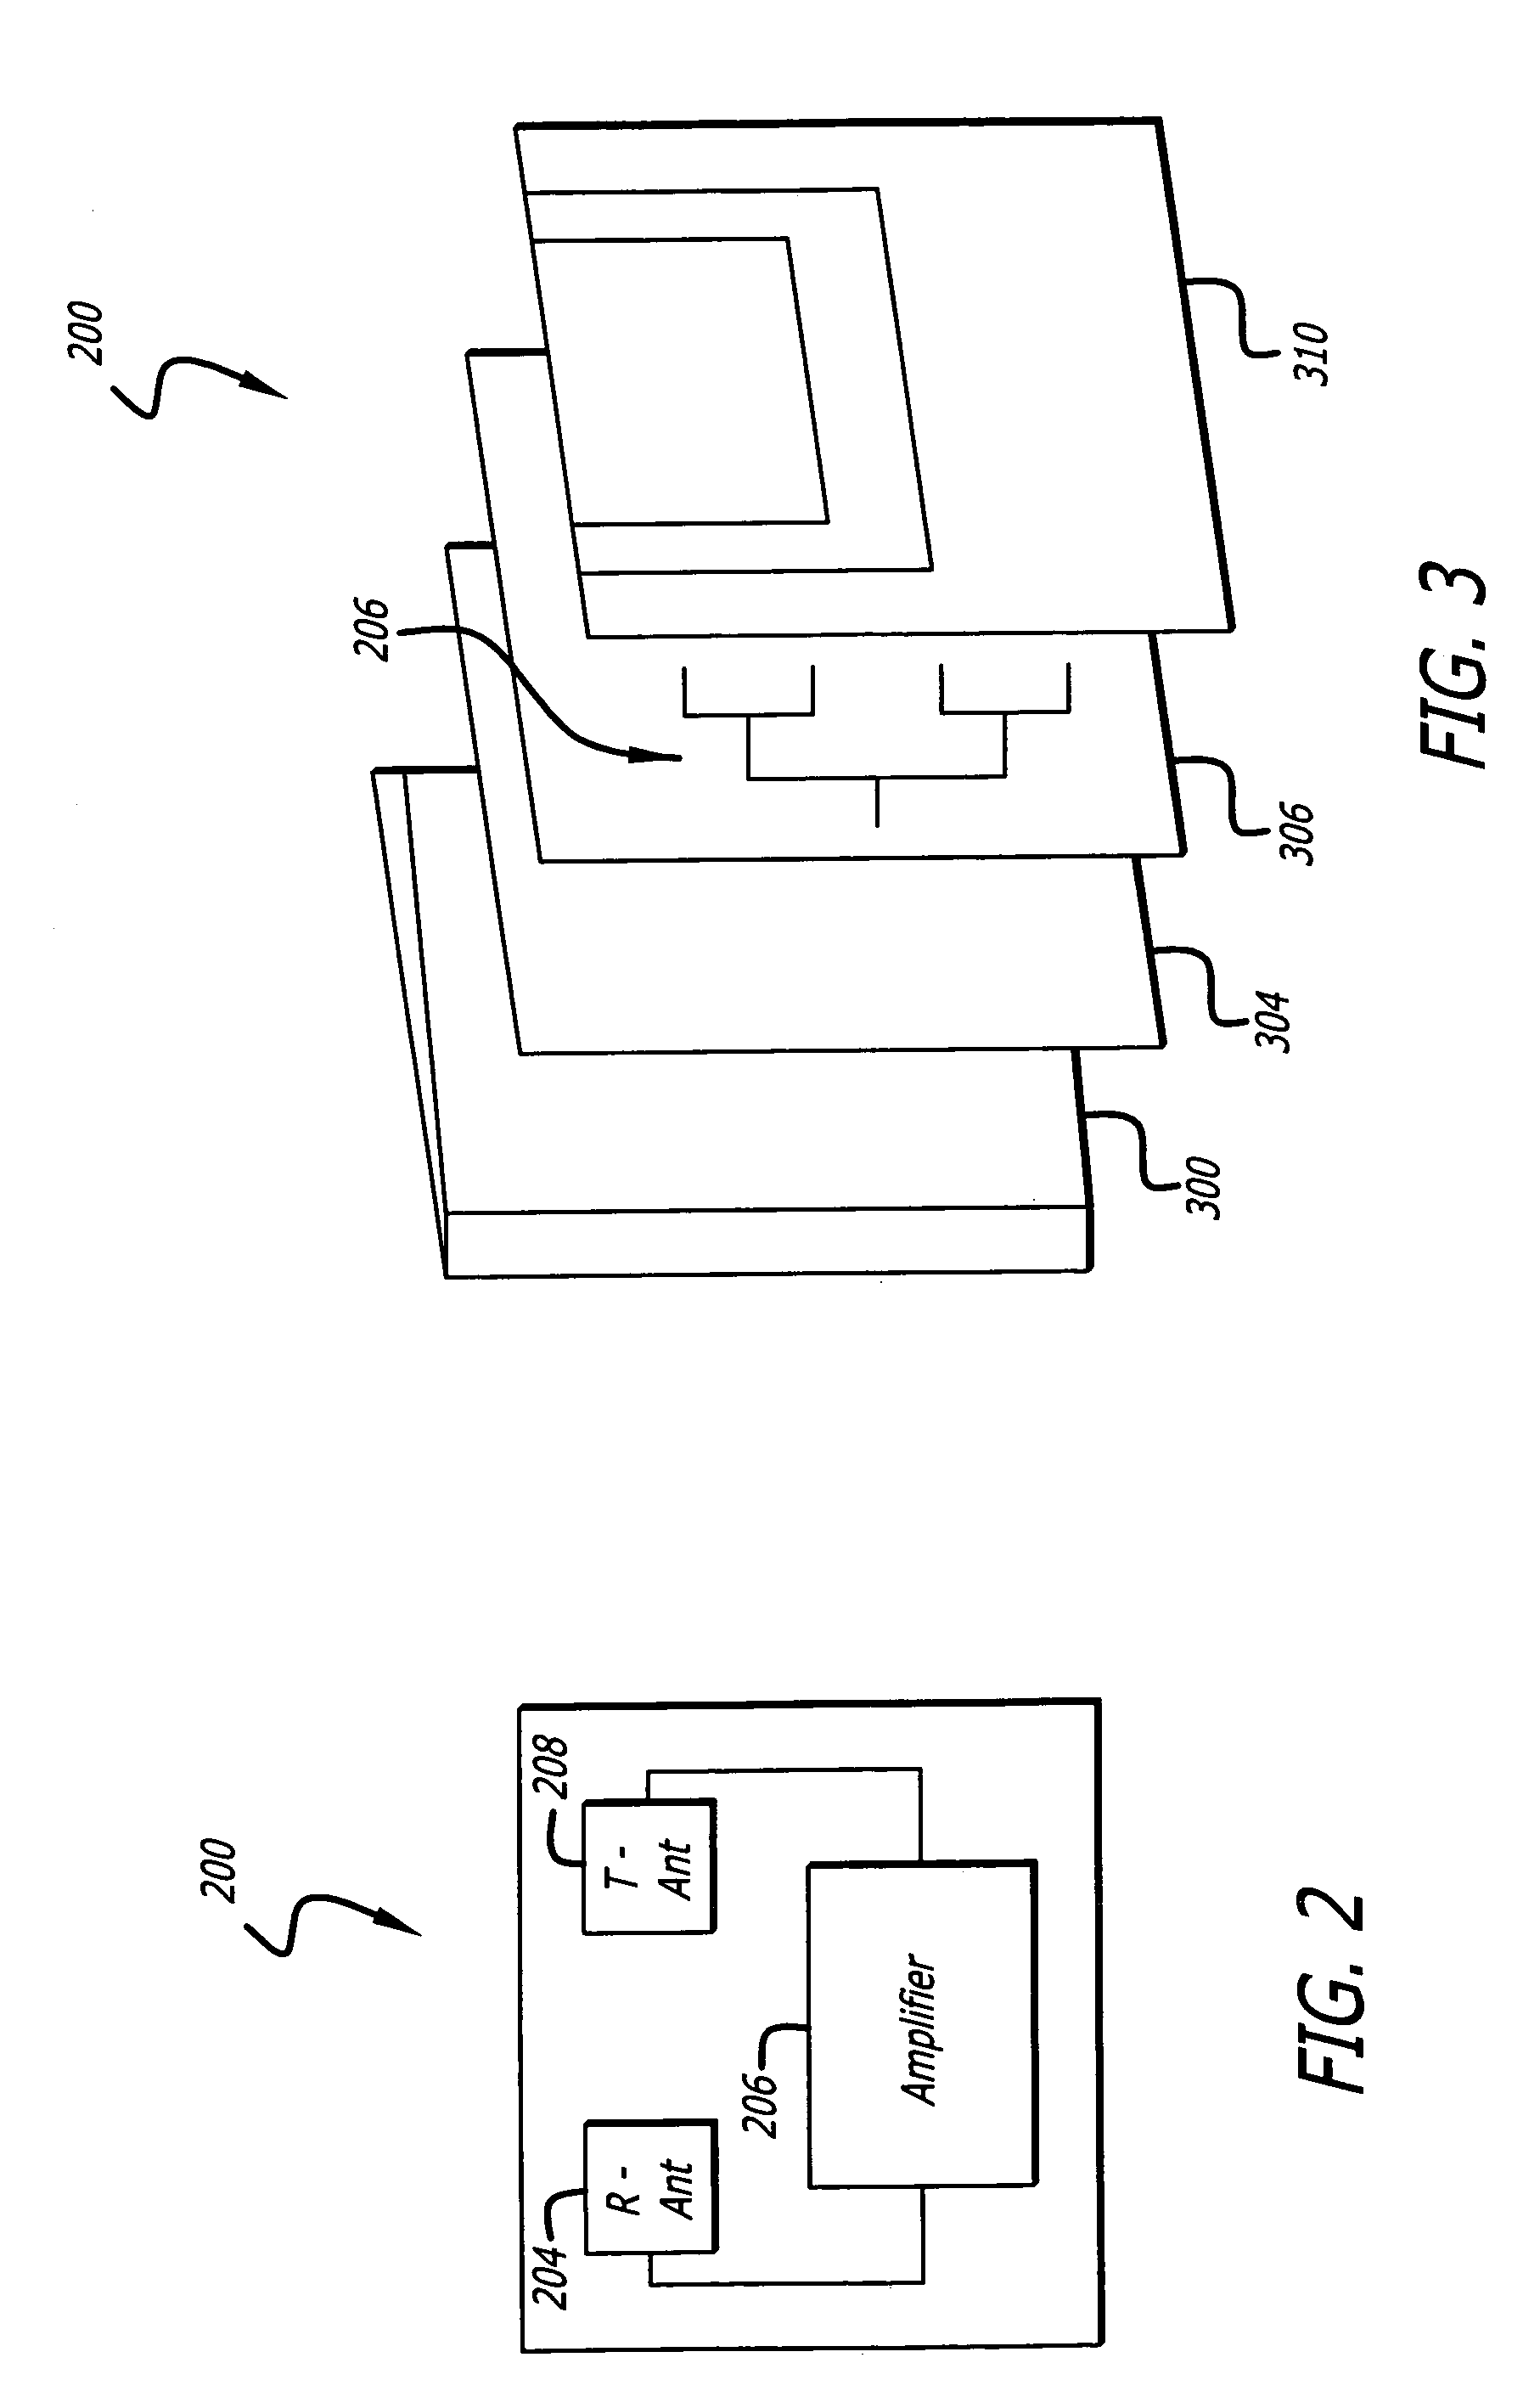 Reflective and transmissive mode monolithic millimeter wave array system and in-line amplifier using same